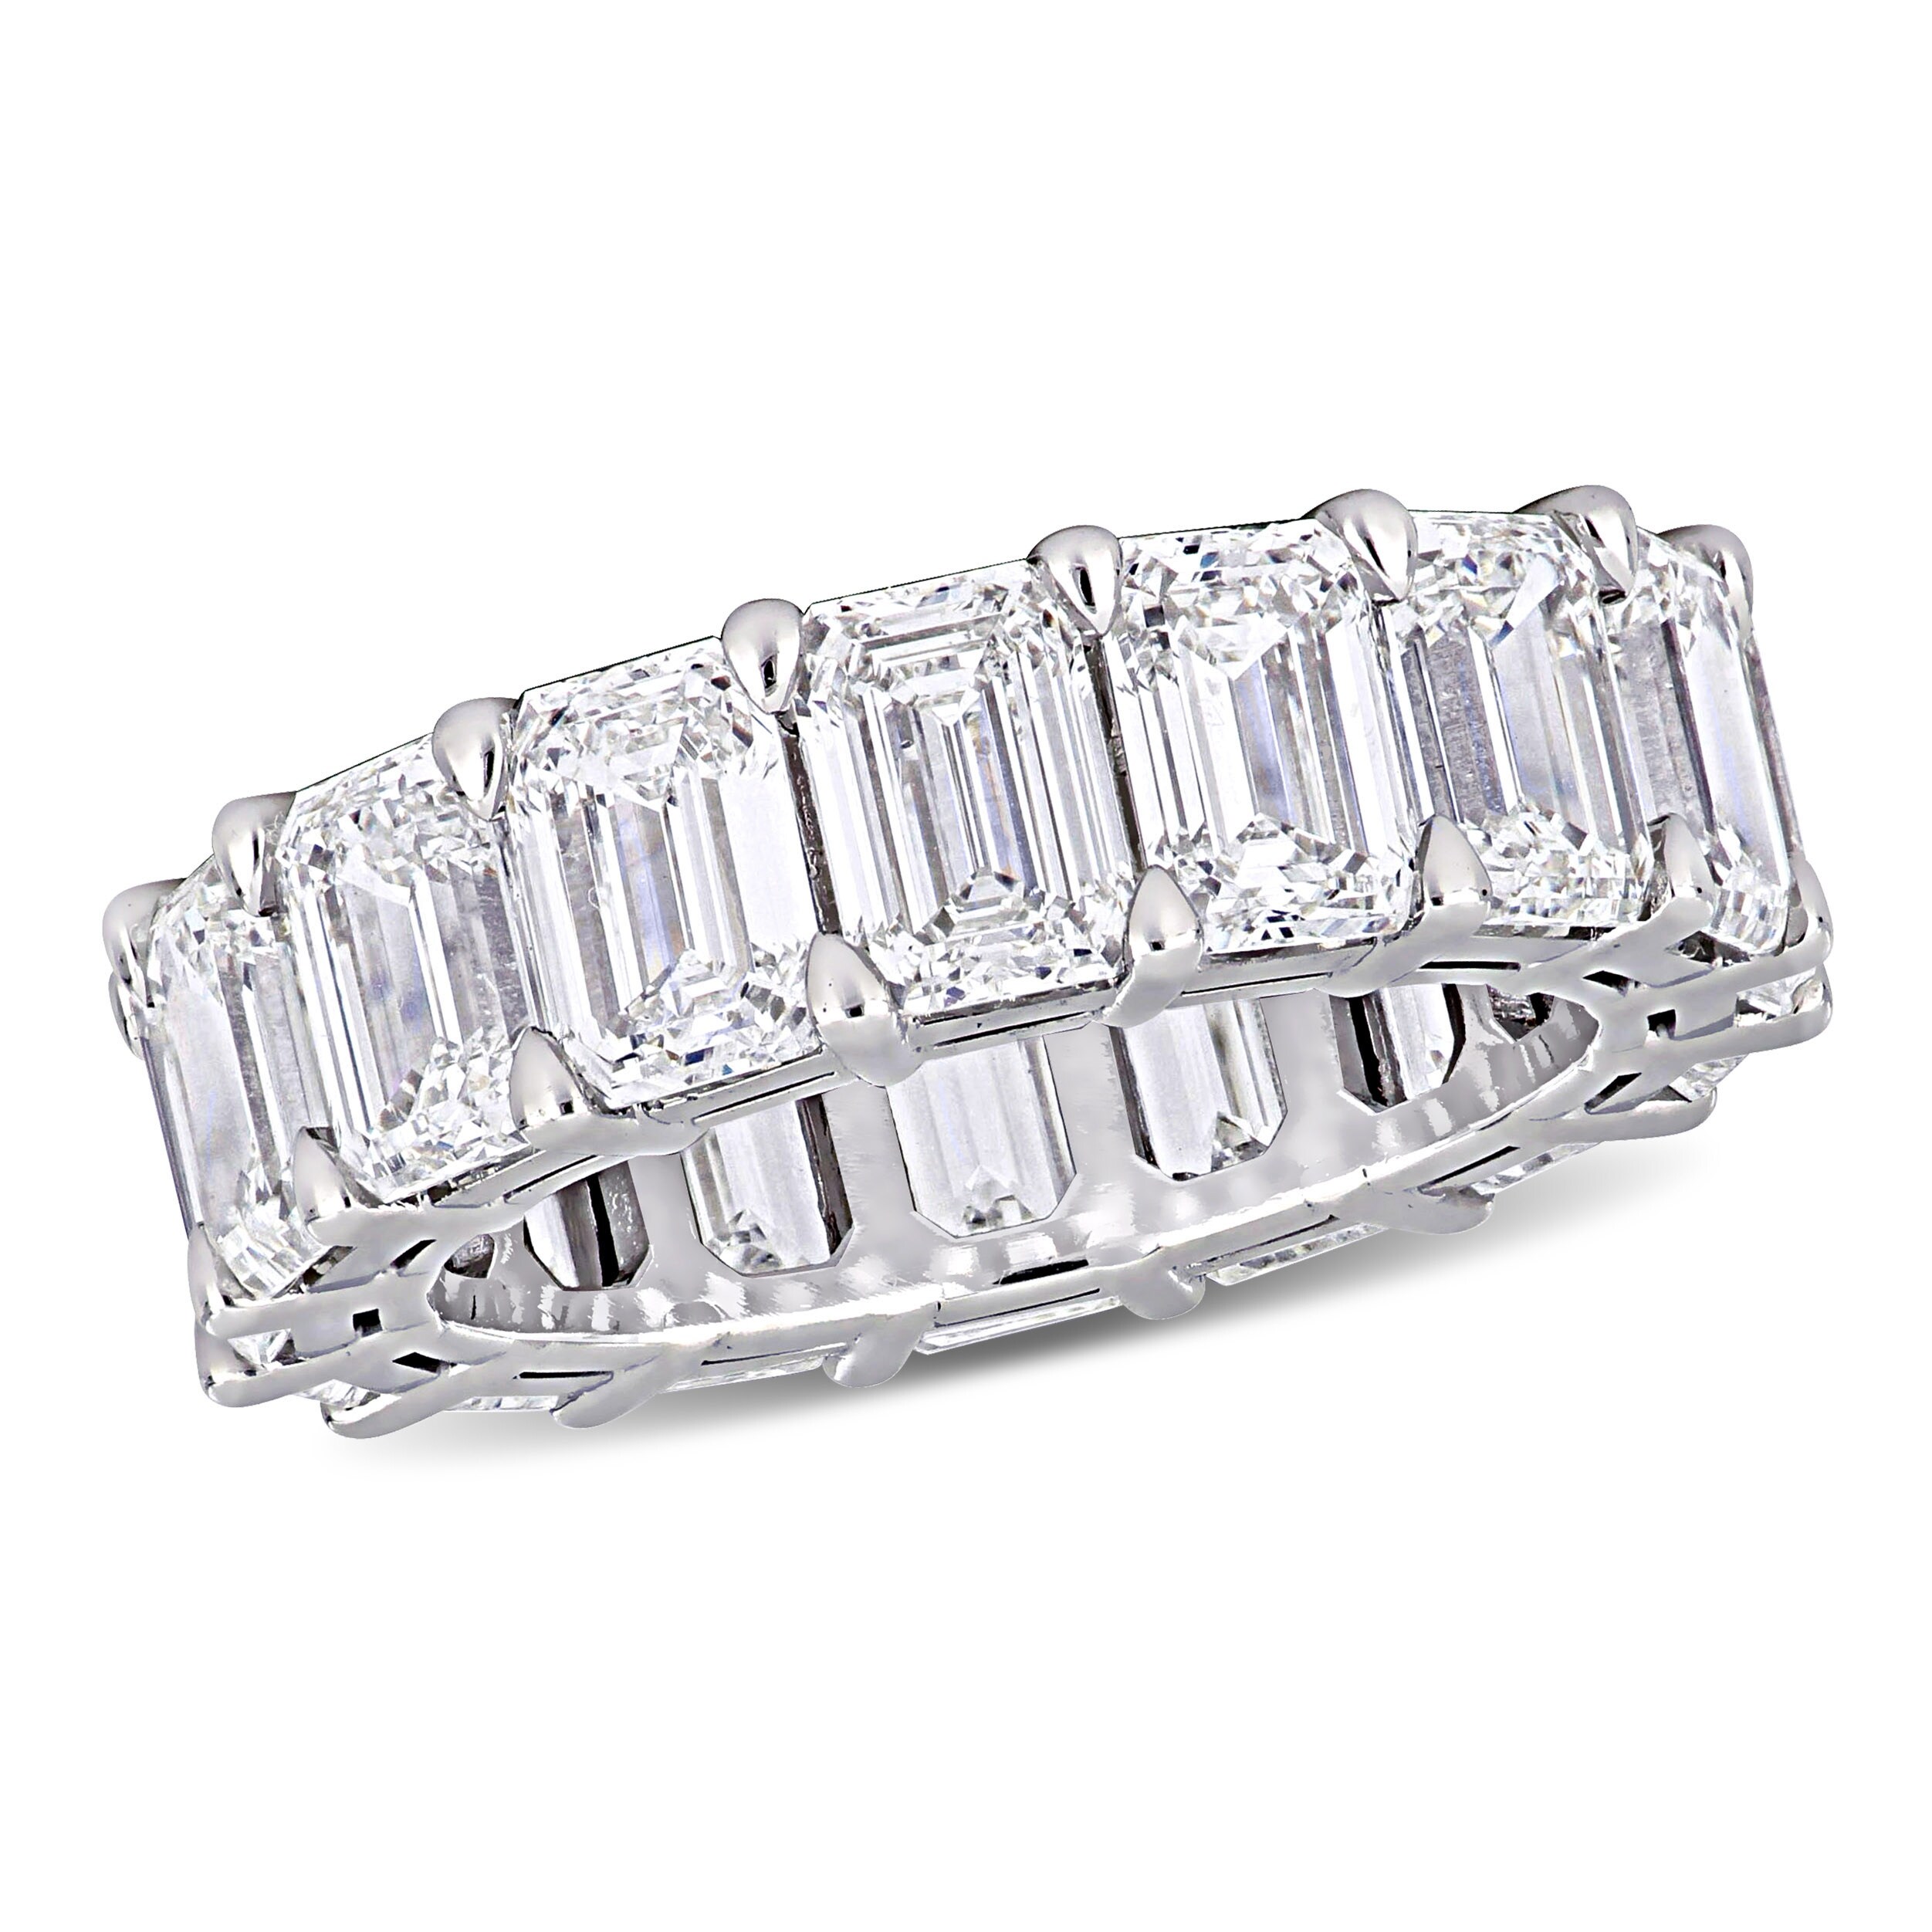 Etenity Bnad,18K White Gold Plated Cubic Zirconia Emerald Cut Eternity Ring Band for Women Men